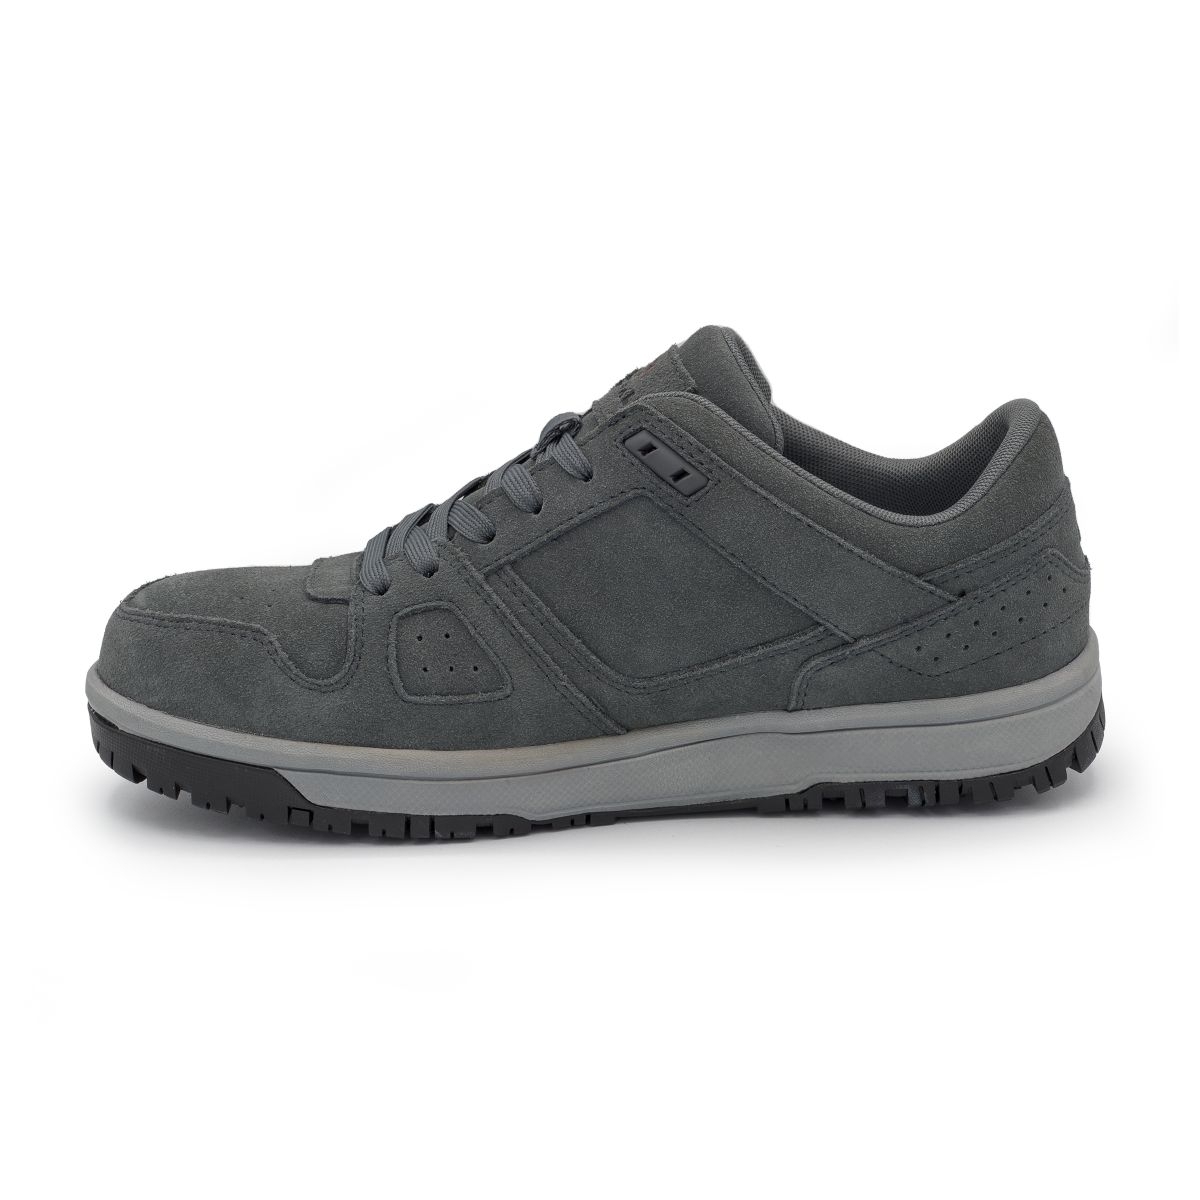 AIRWALK SAFETY Men's Mongo Composite Toe EH Work Shoe Charcoal/Grey - AW6301 CHARCOAL/GRAY - CHARCOAL/GRAY, 8.5-W